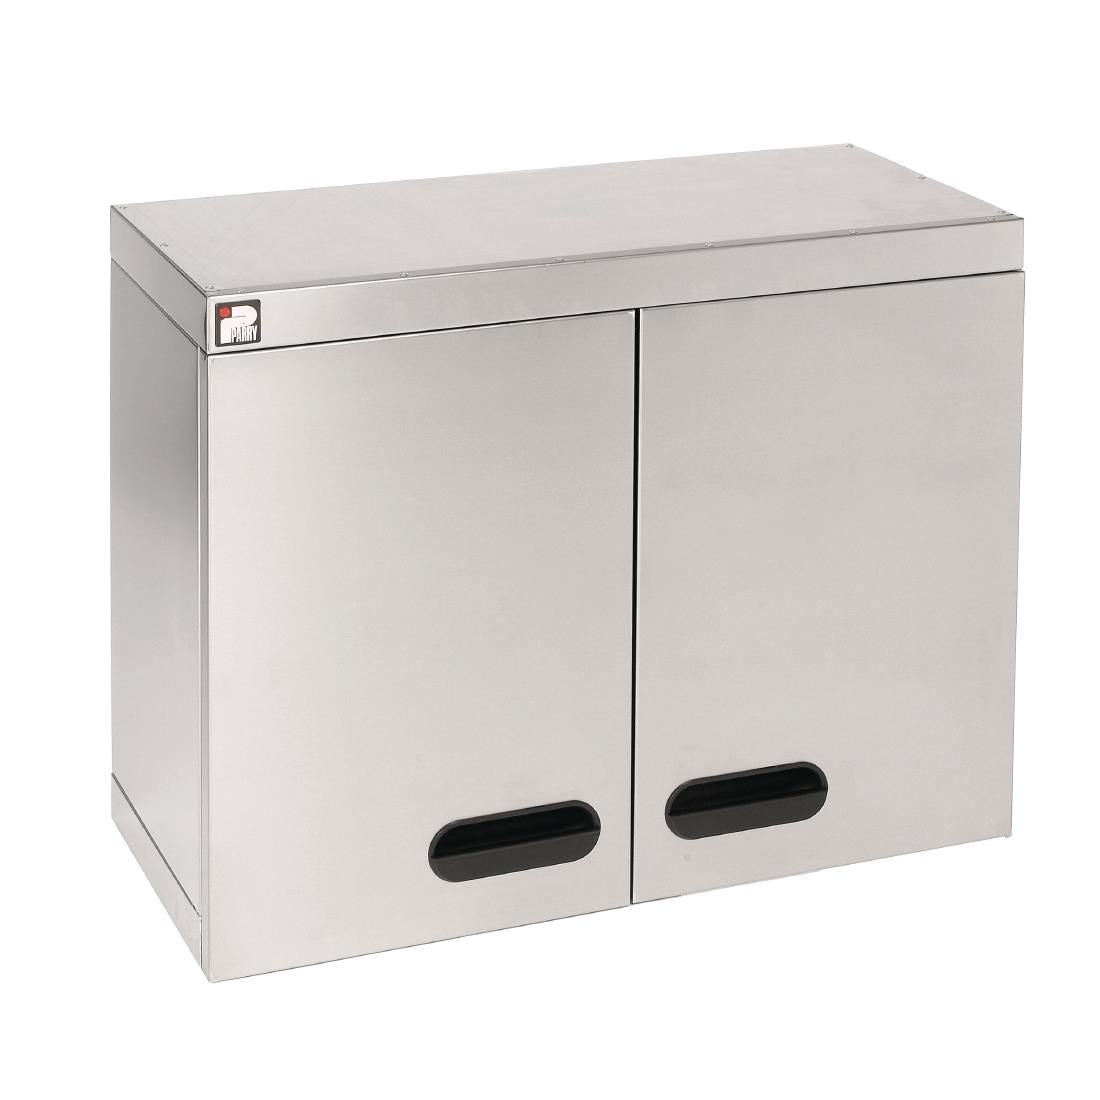 GM735 Parry Stainless Steel Hinged Wall Cupboard 750mm JD Catering Equipment Solutions Ltd